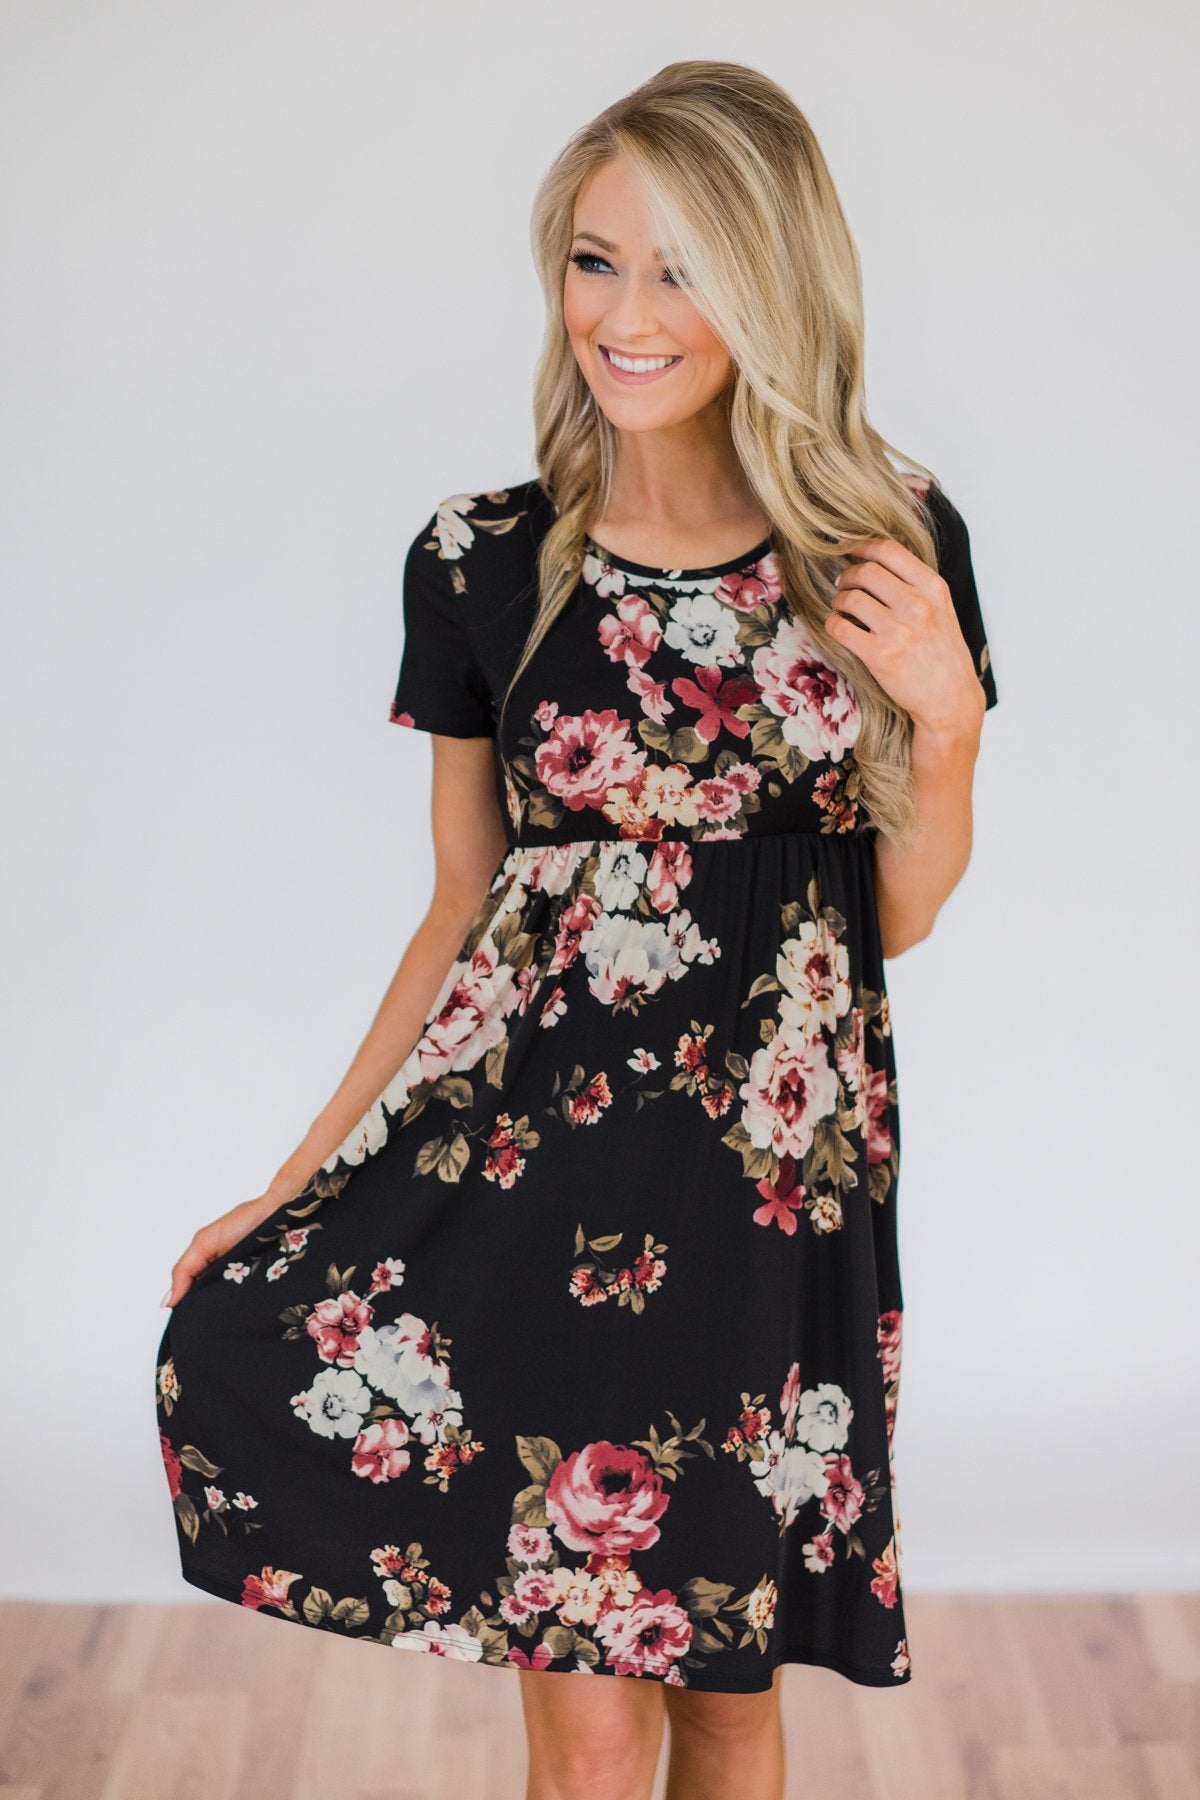 Best Is Yet To Come Floral Short Sleeve Dress- Black – The Pulse Boutique